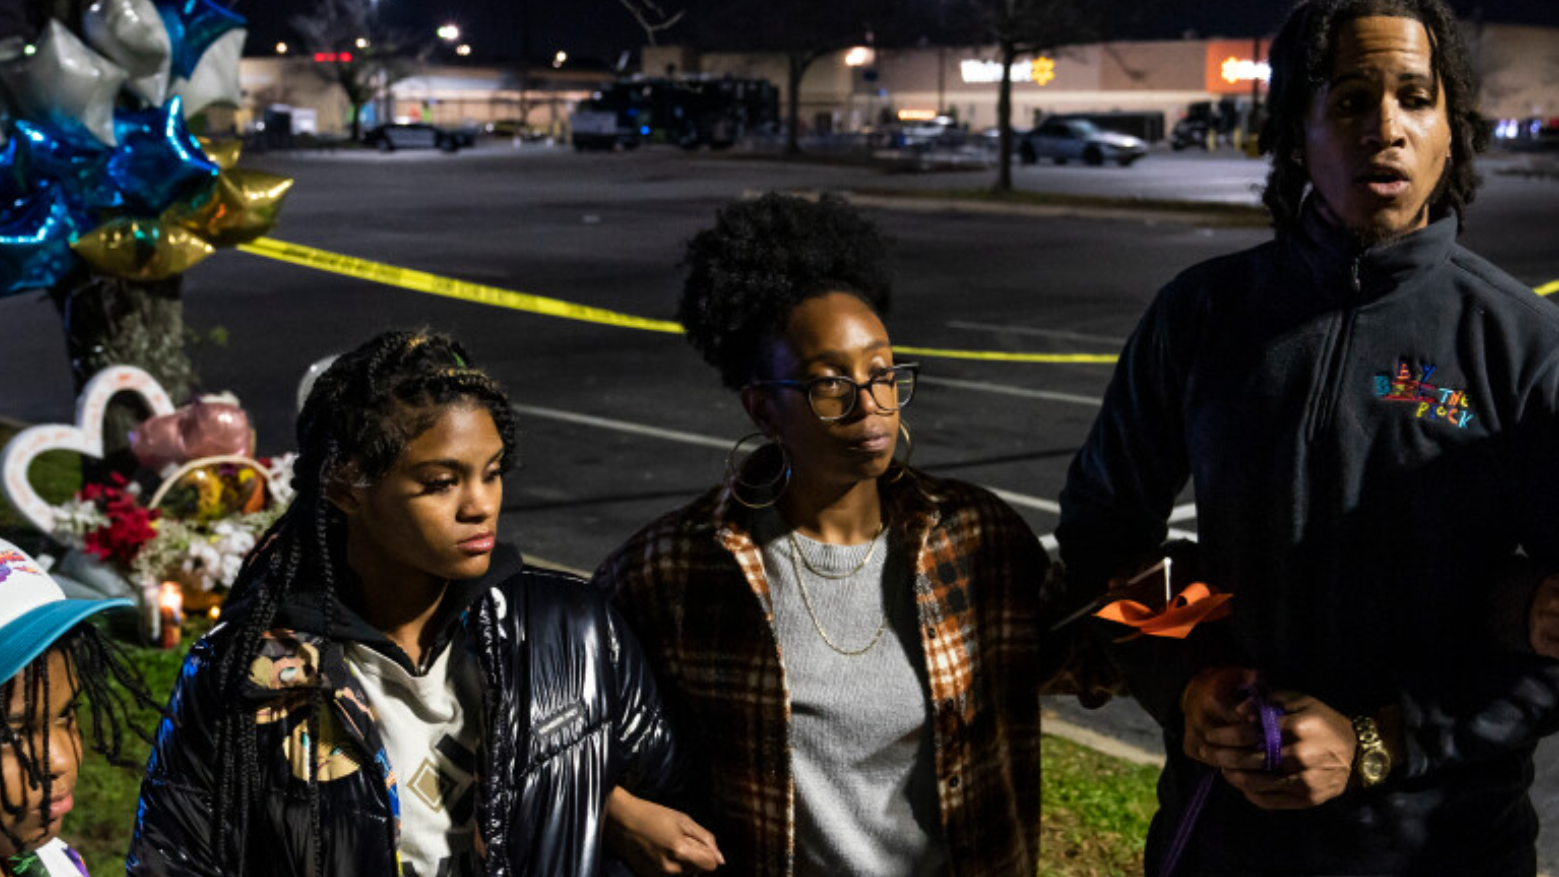 Members of the gun violence activist group, Violence Intervention and Prevention, are pictured praying at a memorial for the victims killed during a shooting at a Walmart store in Chesapeake, Virginia.